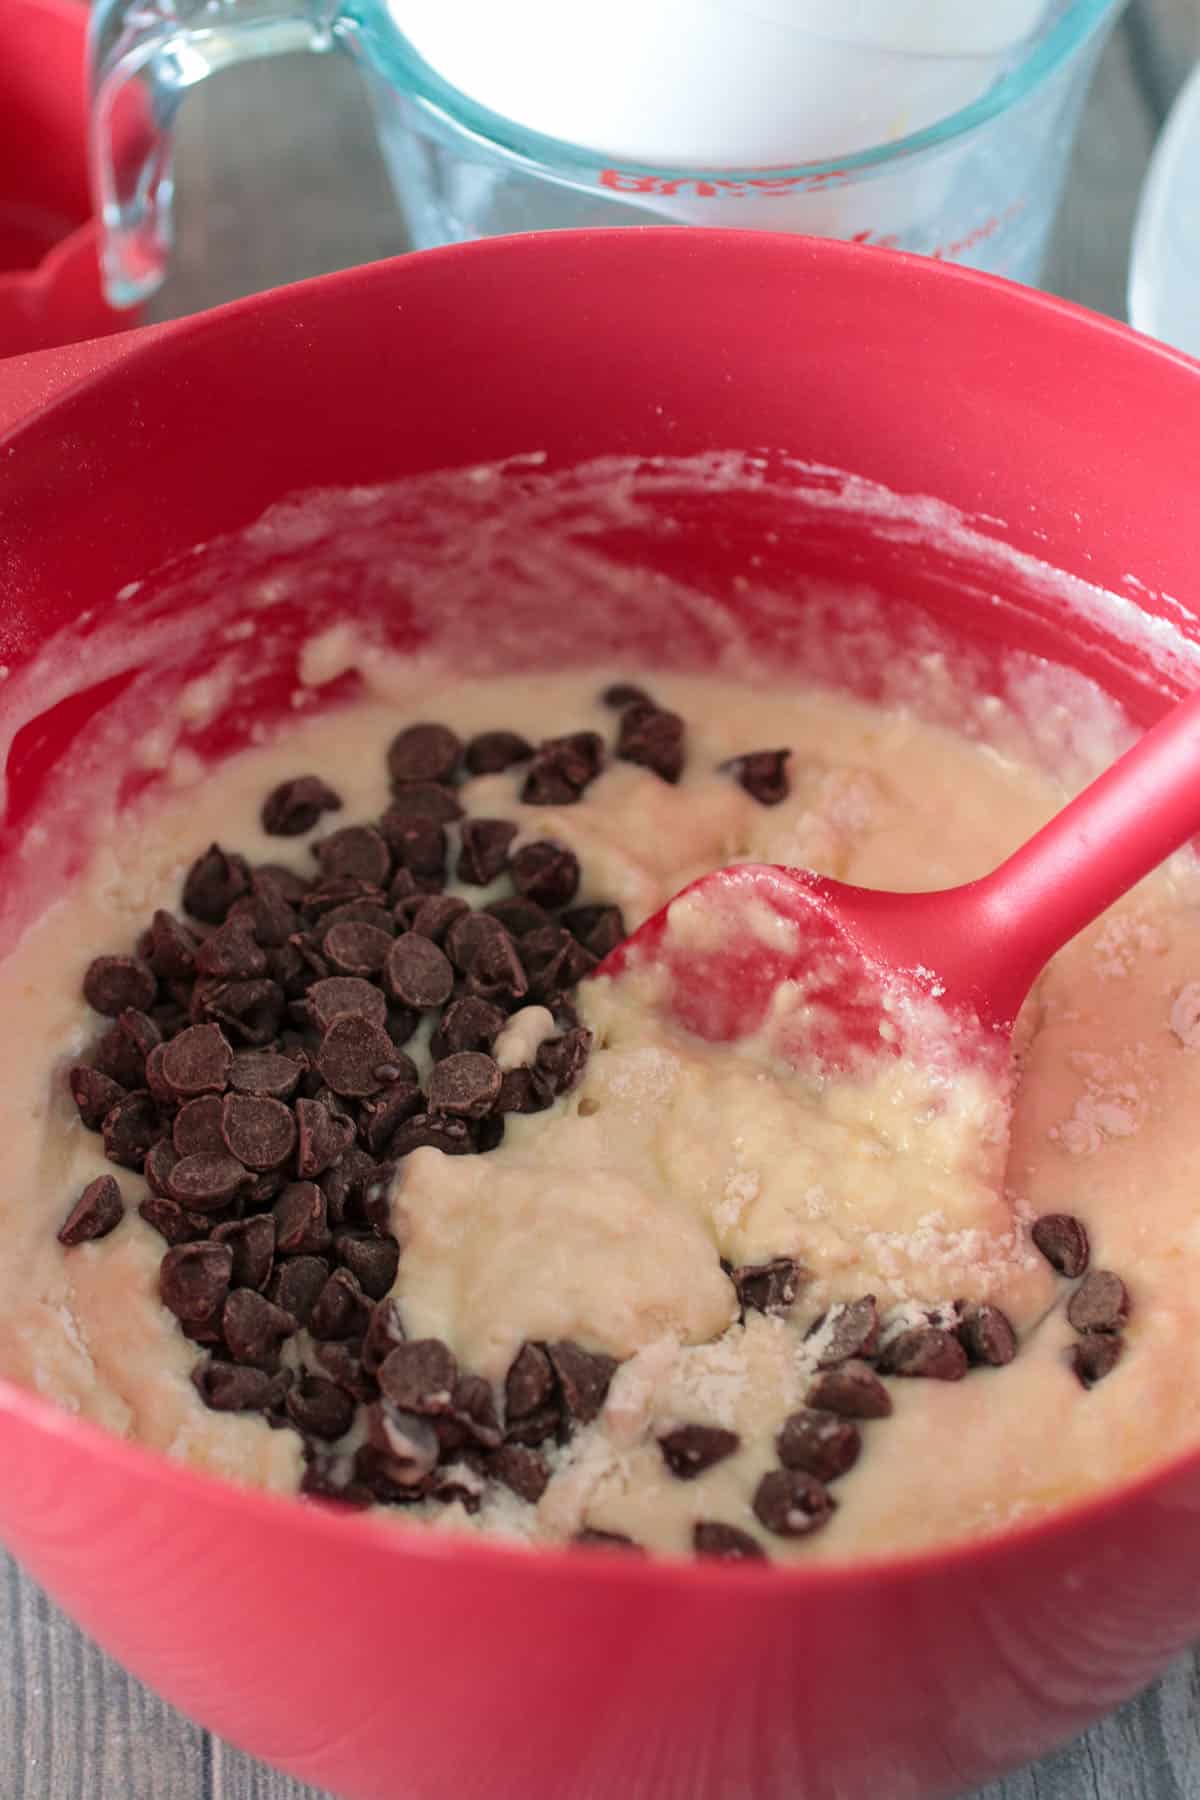 Folding the chocolate chips into the cake batter.